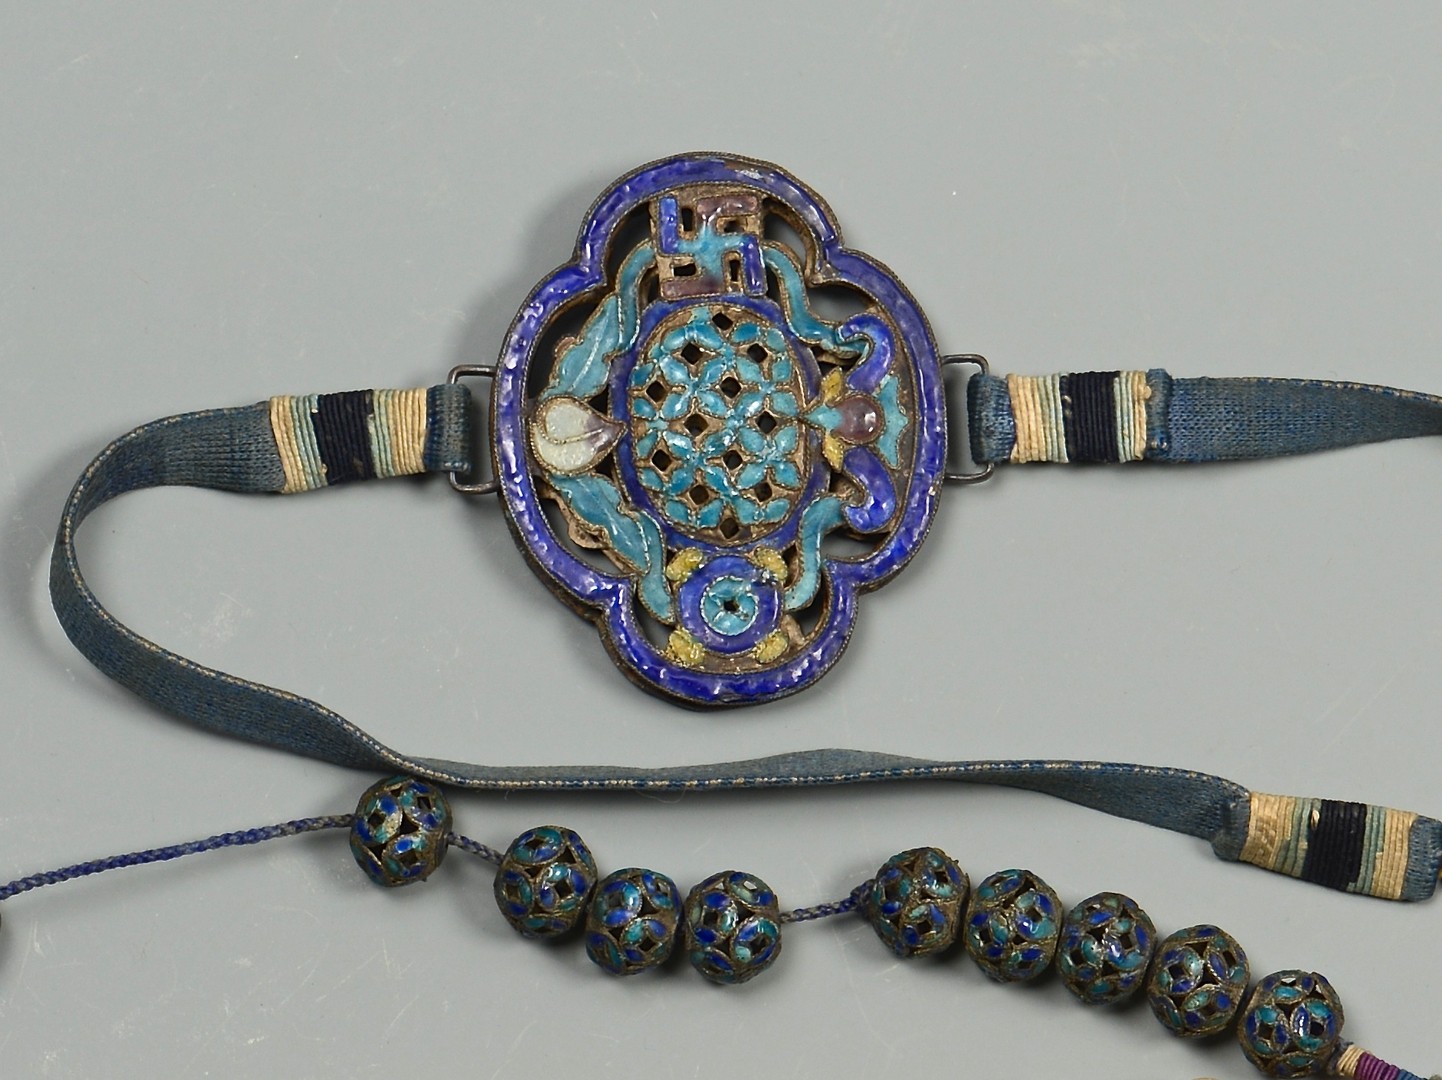 Lot 1: Qing Dynasty Court Necklace